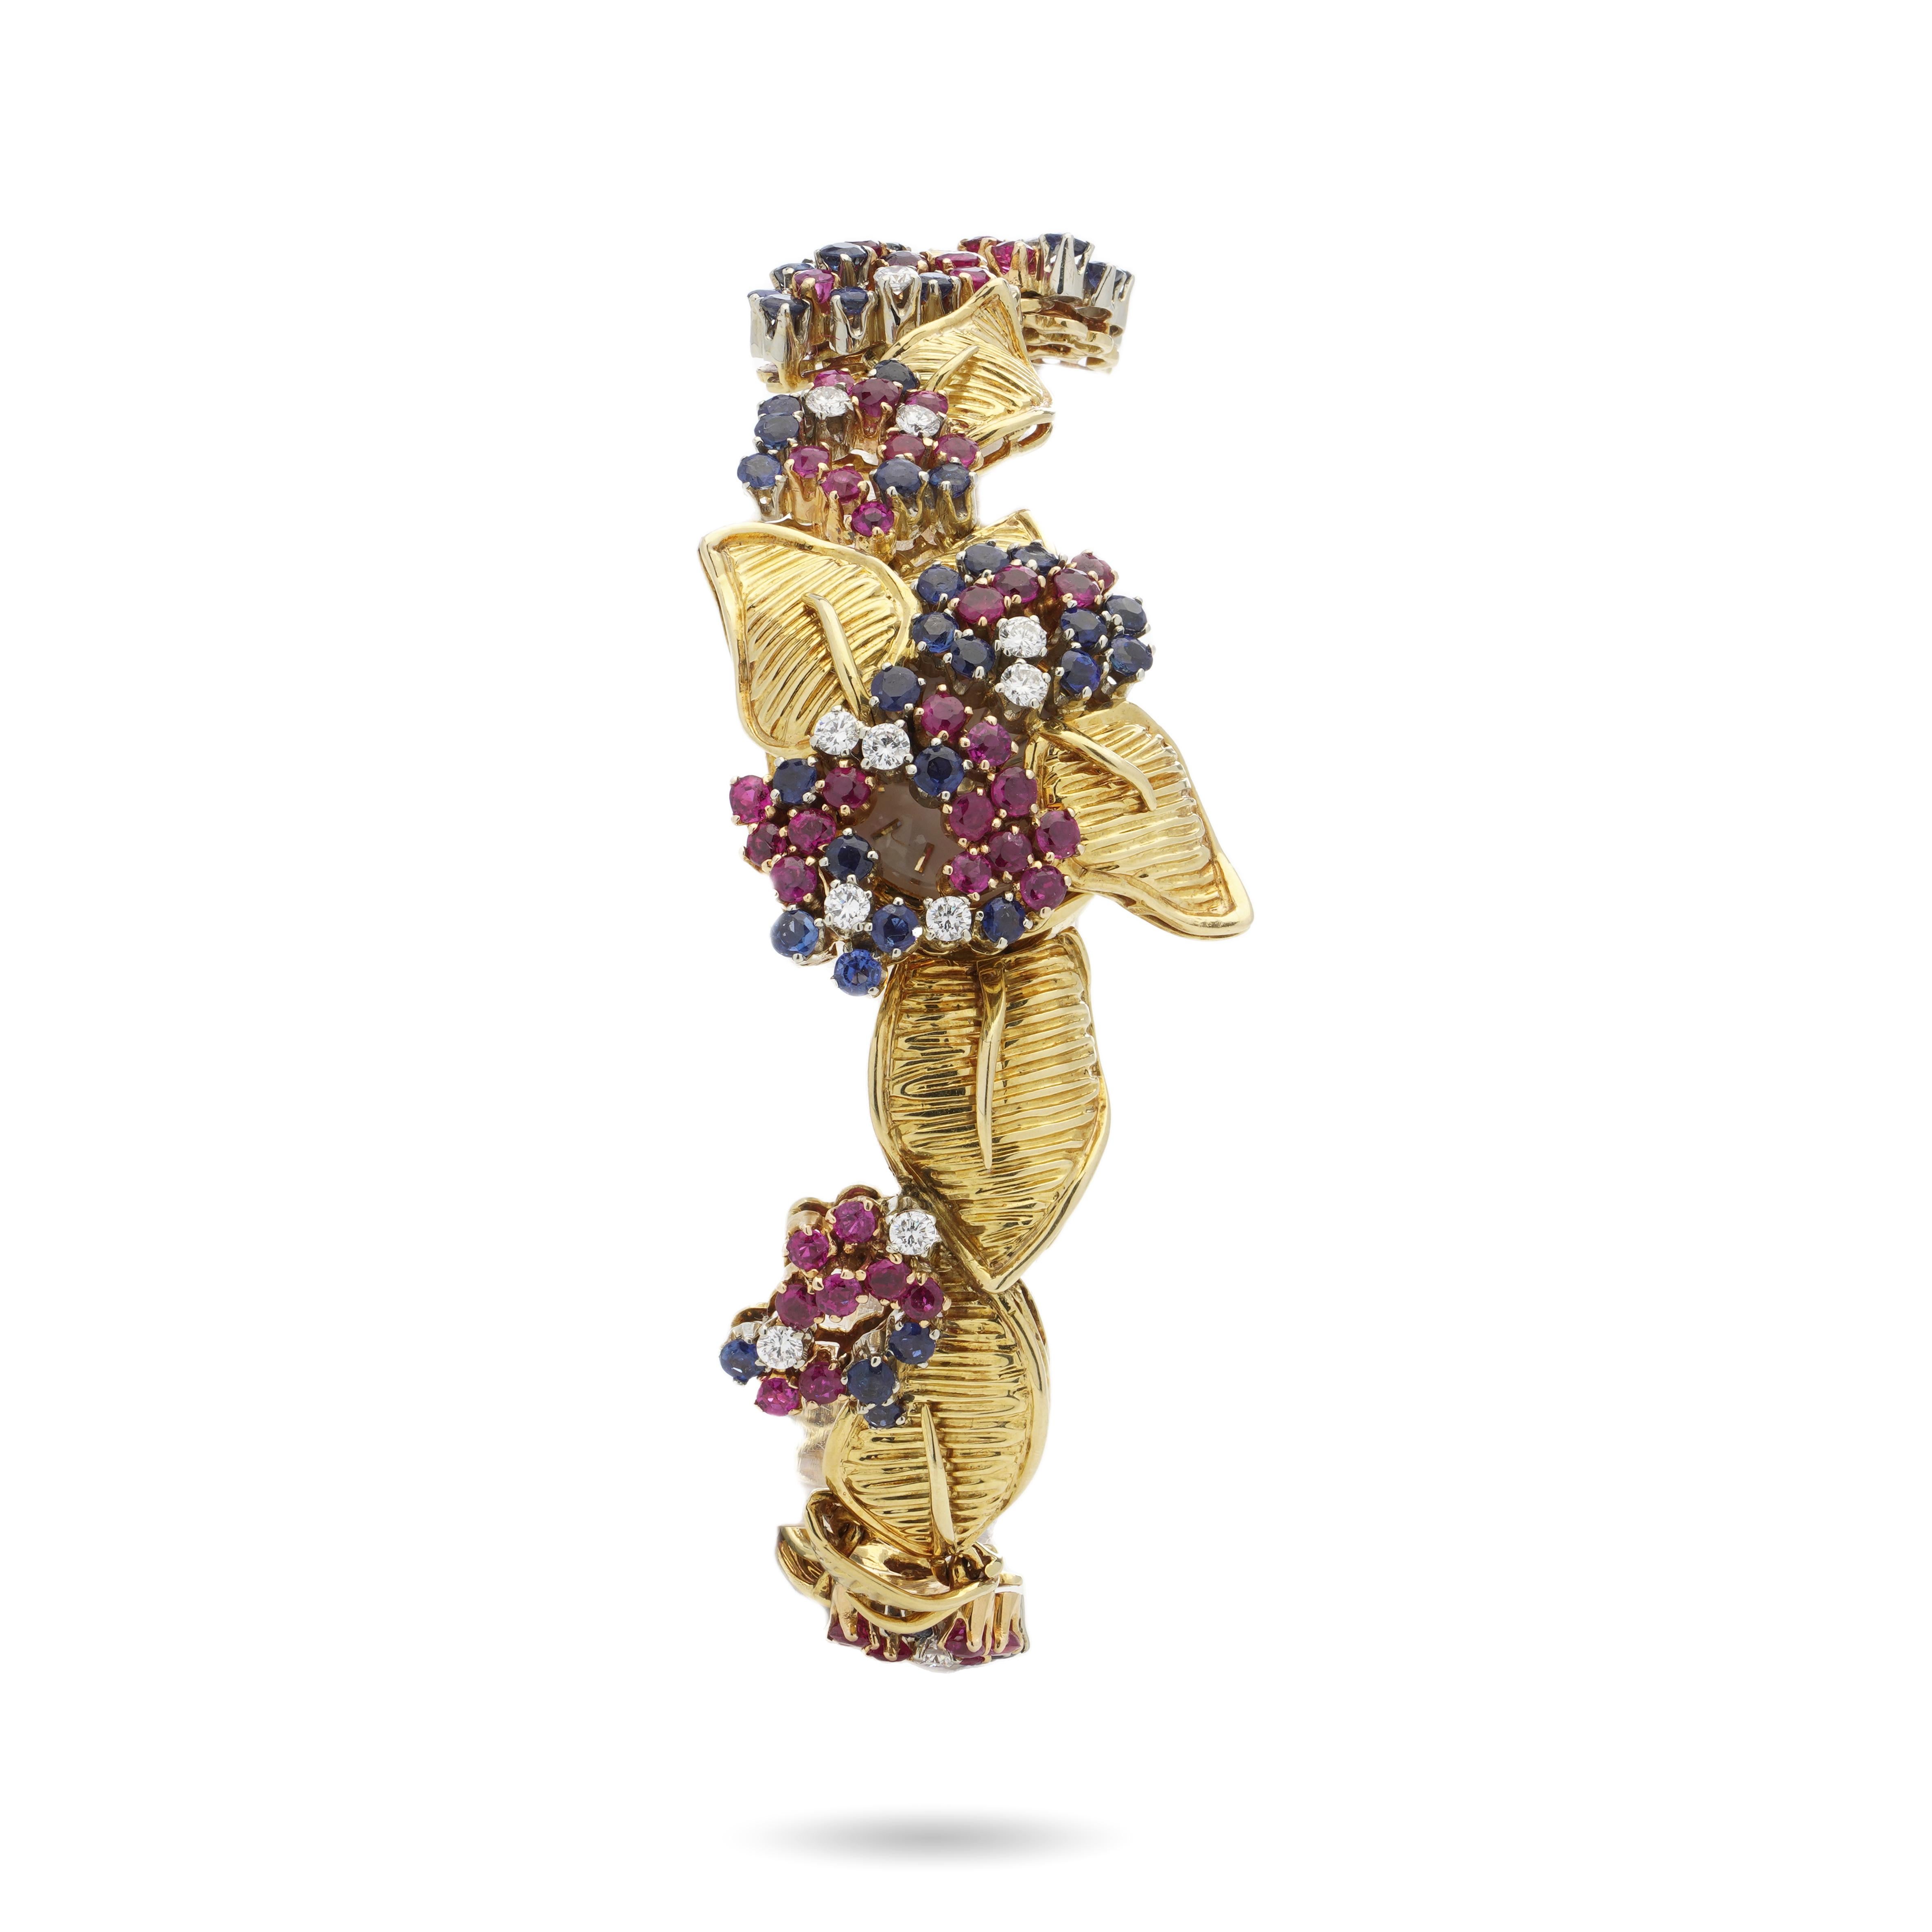 Gübelin vintage 18kt. yellow gold Sapphire, Ruby & Diamond bracelet watch.
Made in Switzerland, Circa 1960's

This breathtaking watch which doubles as a bracelet when the case cover is closed is embellished with a stunning and intricate setting of